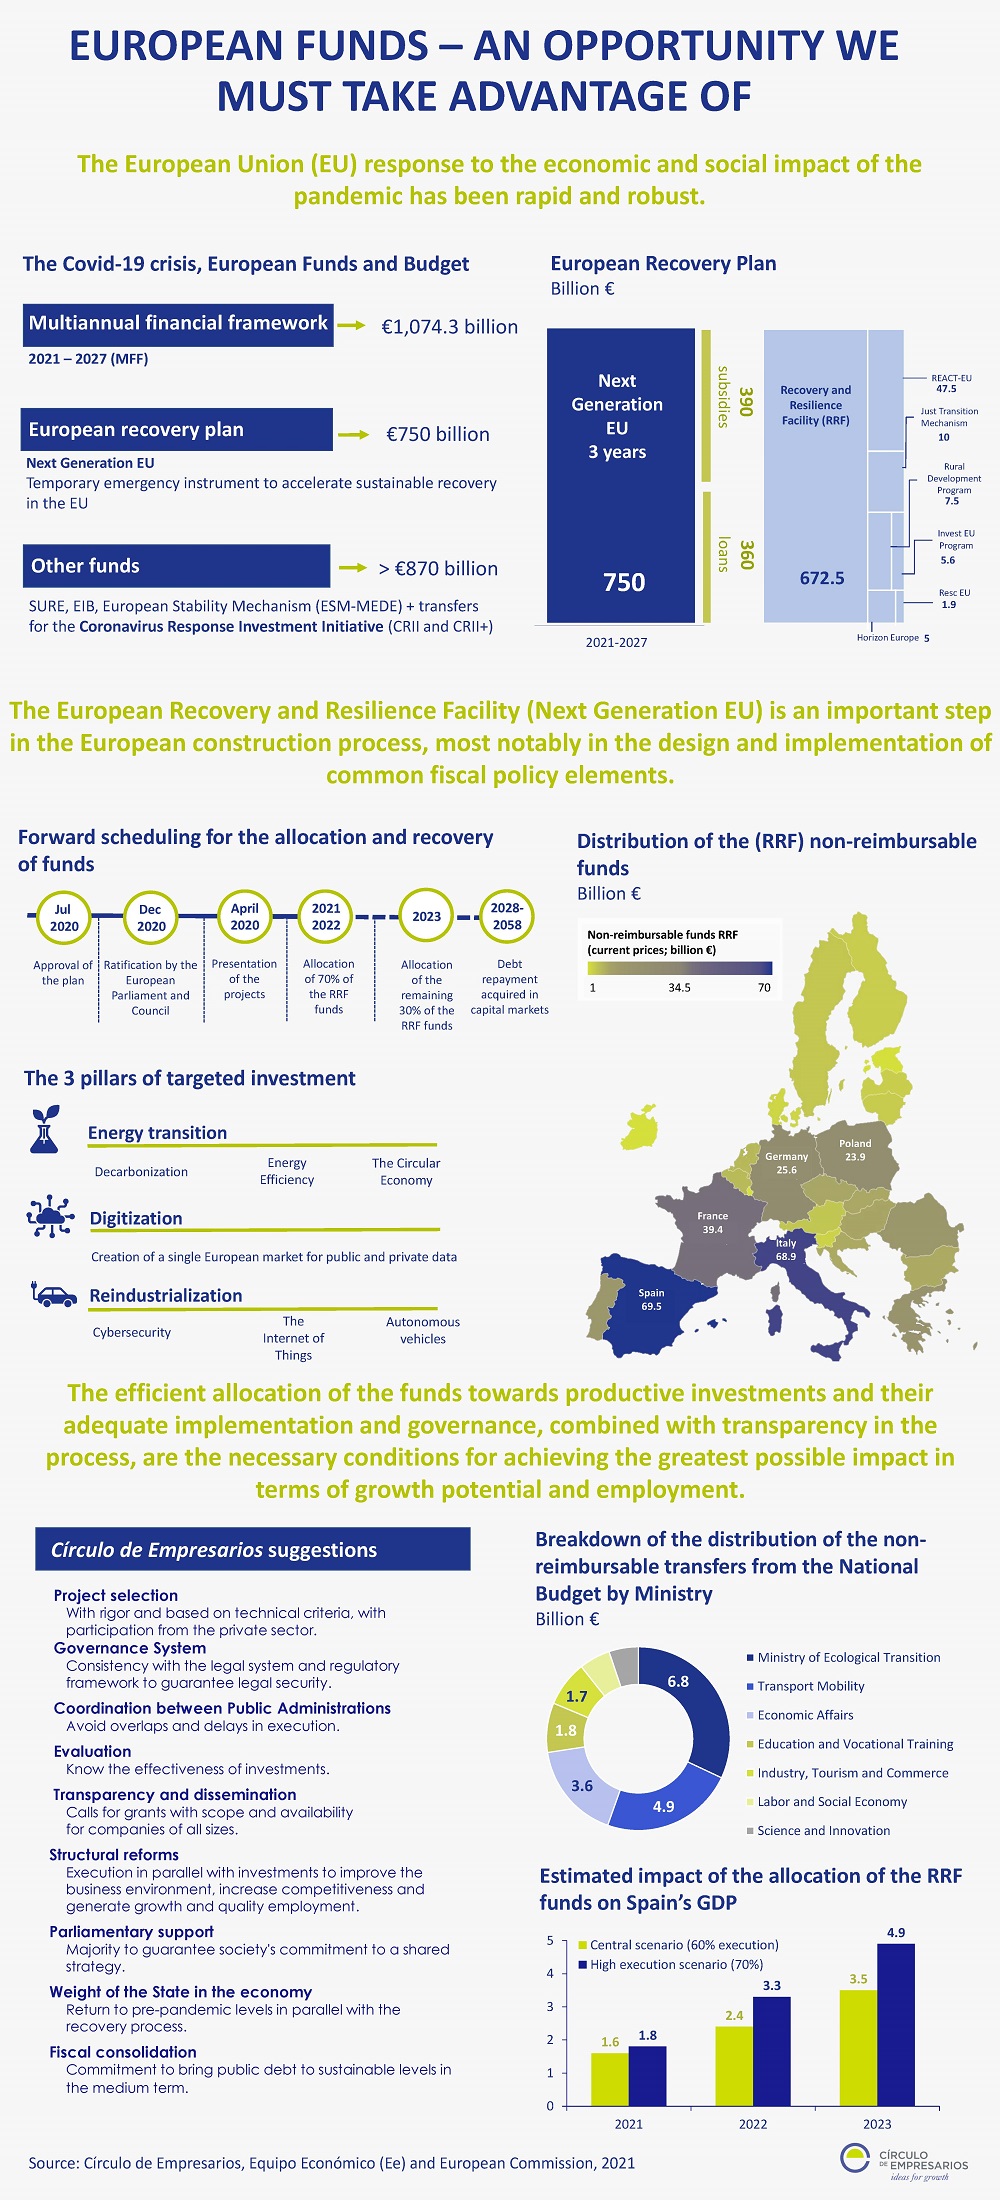 European-Funds-an-opportunity-we-must-take-advantage-of-infographic-March-2021-Circulo-de-Empresarios